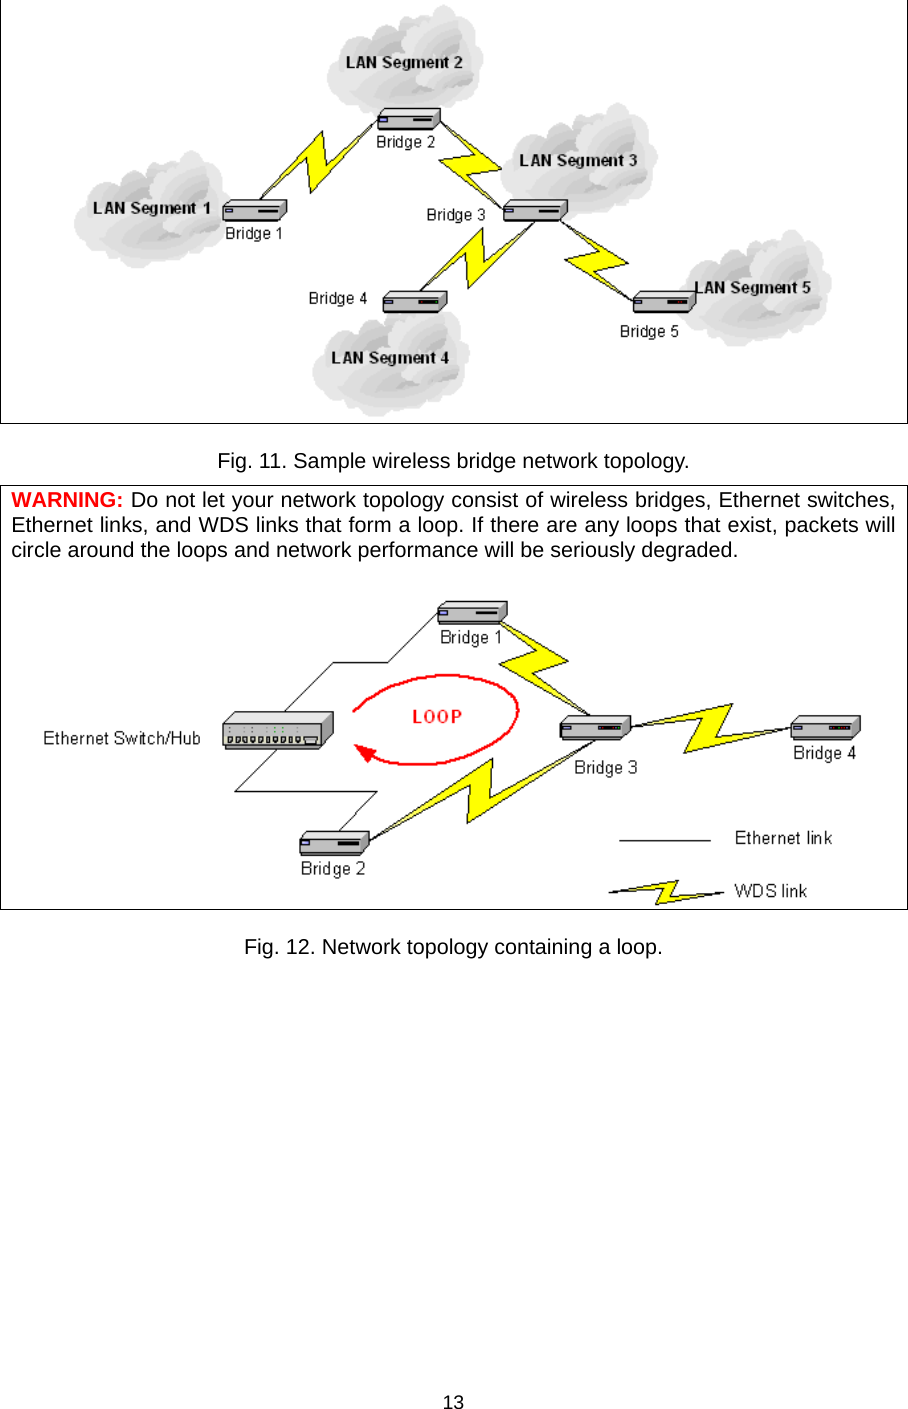   13 Fig. 11. Sample wireless bridge network topology. WARNING: Do not let your network topology consist of wireless bridges, Ethernet switches, Ethernet links, and WDS links that form a loop. If there are any loops that exist, packets will circle around the loops and network performance will be seriously degraded.  Fig. 12. Network topology containing a loop. 